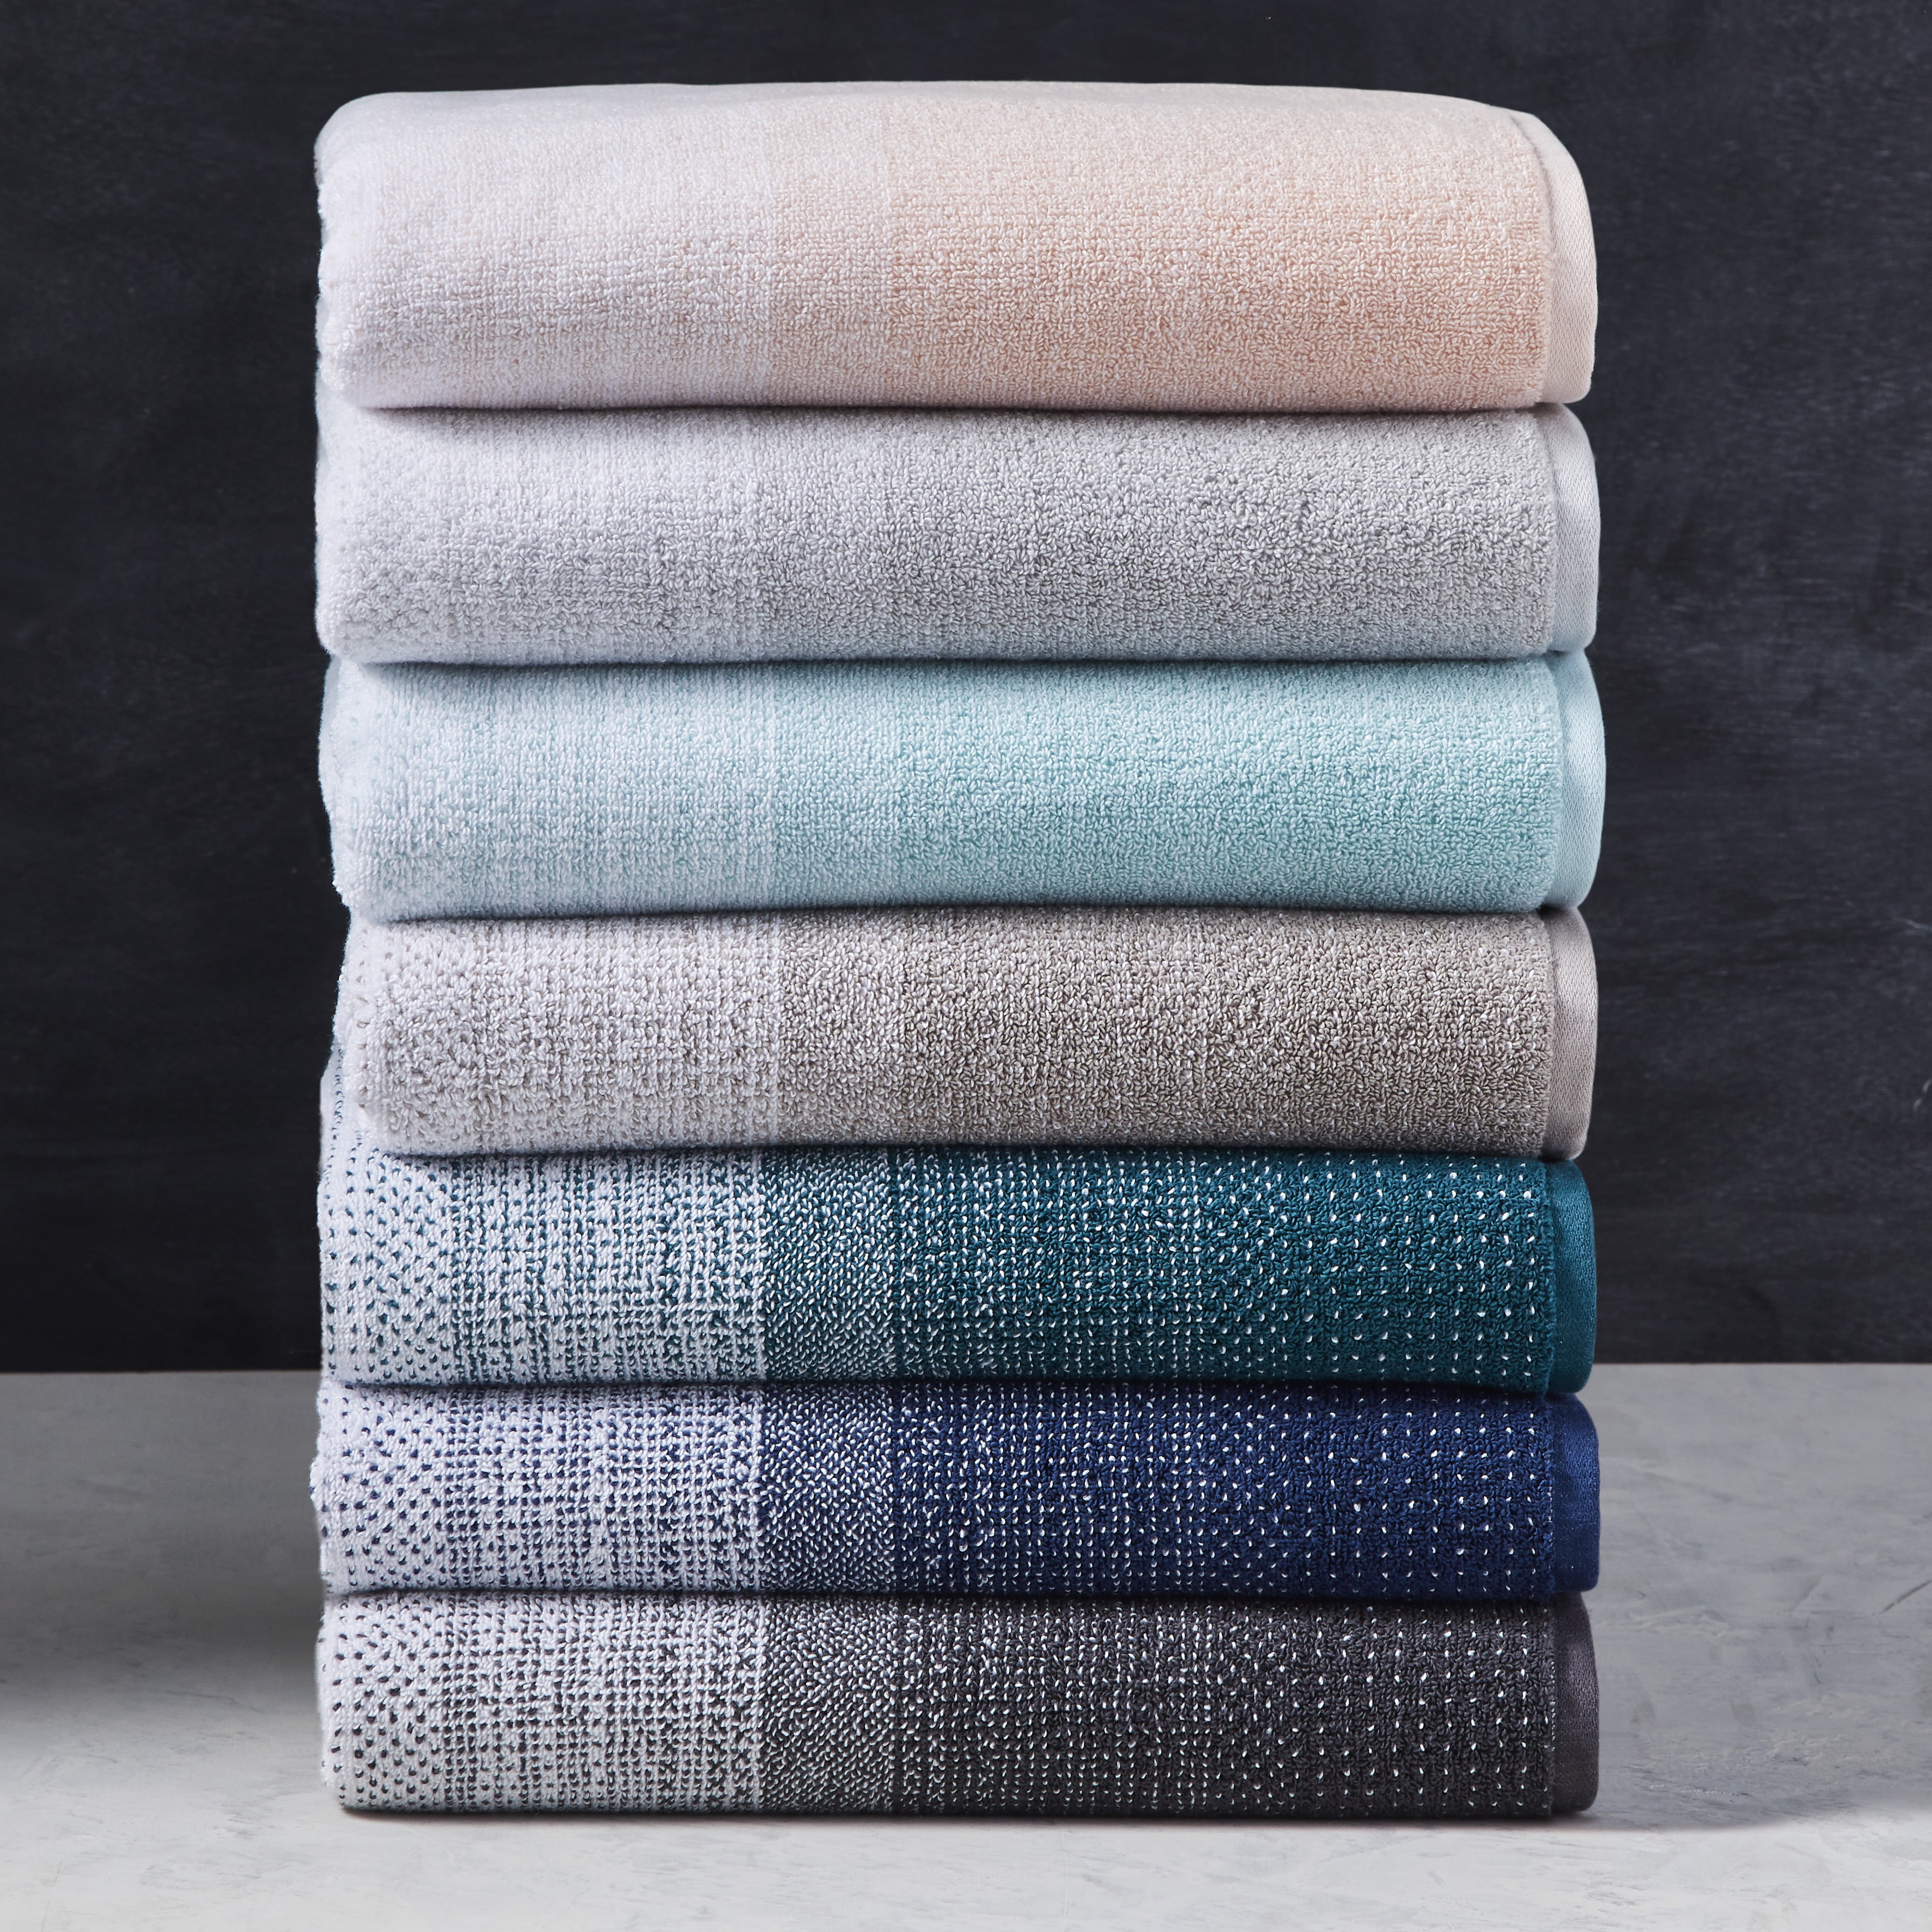 Costco Deals - ☁️ Who else loves soft towels?! We do and